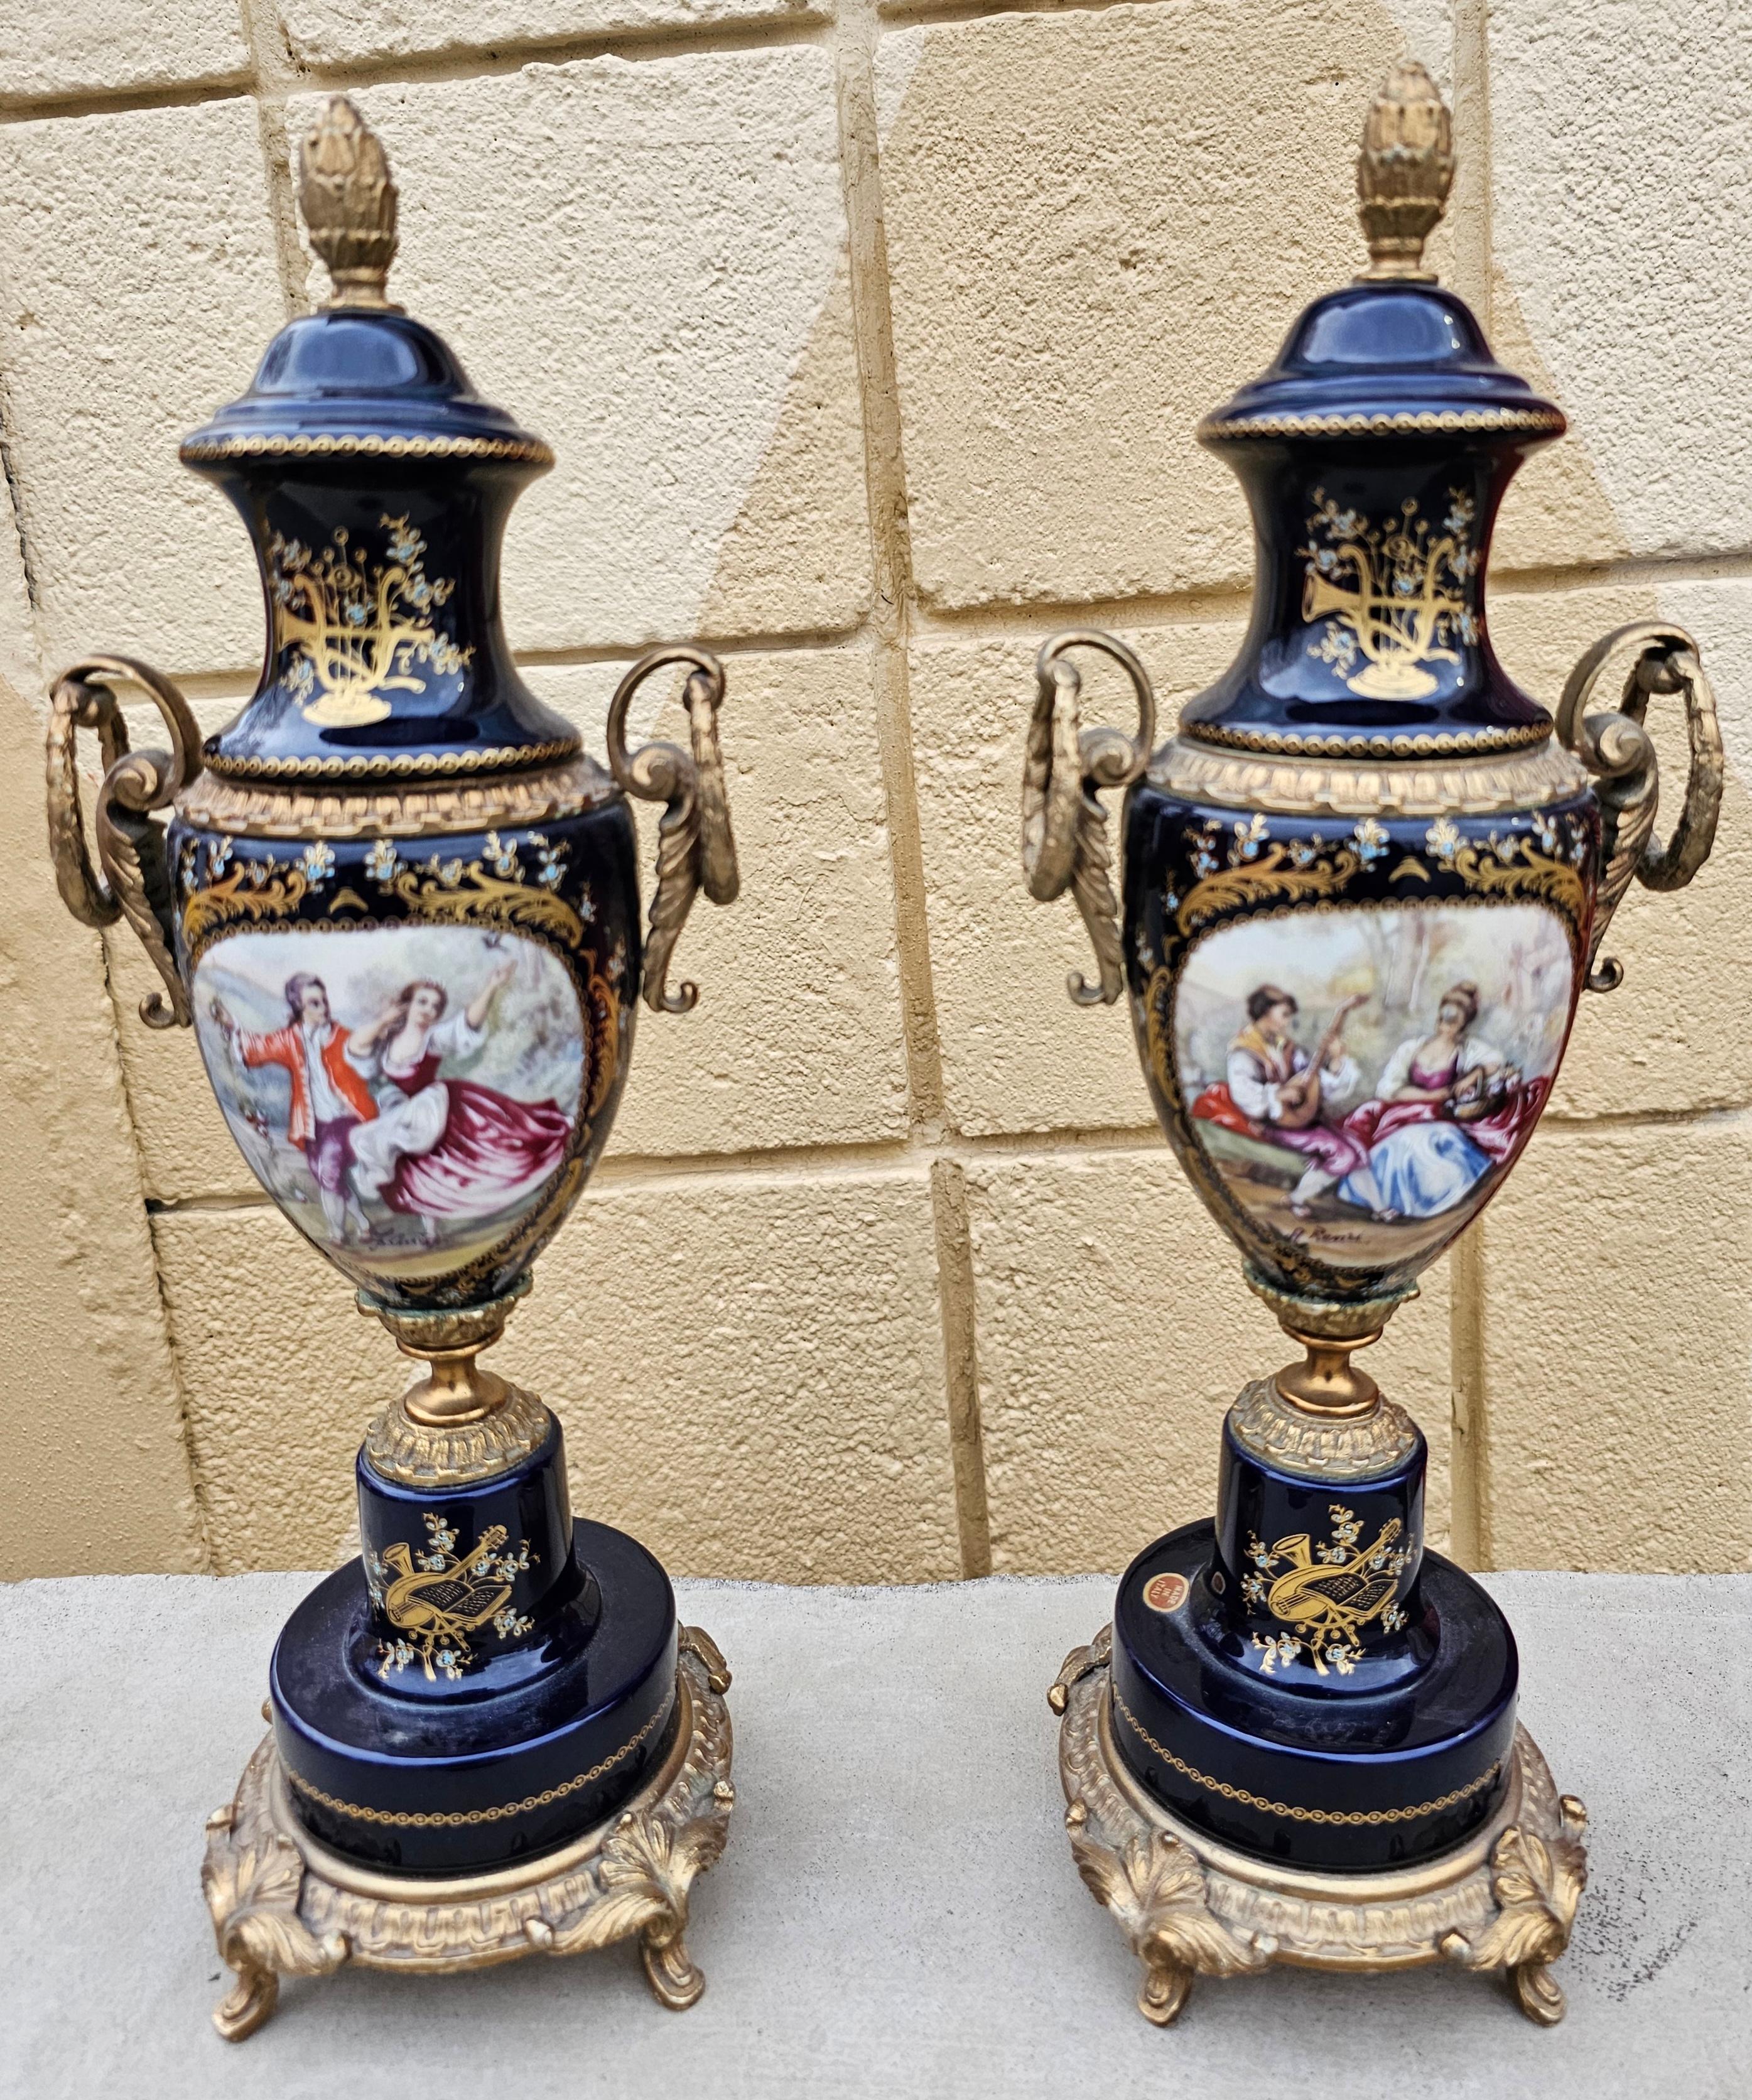 A Pair of  Italian Made French Empire Louis XV Sèvres Porcelain Gilt Bronze and Transfer hand decorated integrated Covered Urns. Very good condition. Measures 5